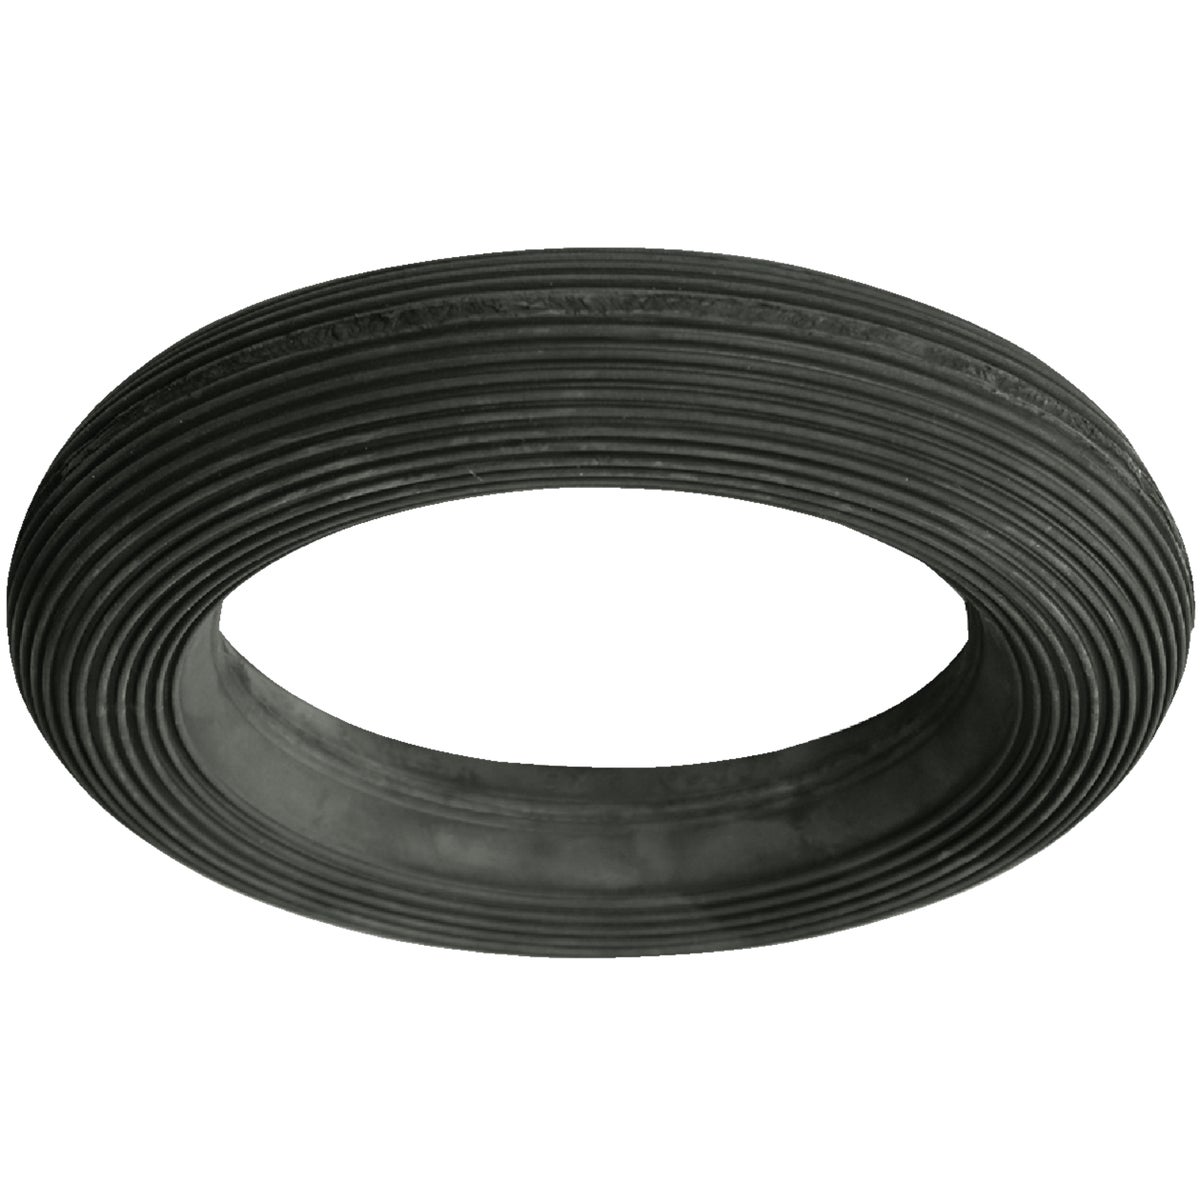 Fernco 4 In. x 6 In. Rubber Sewer and Drain O-Ring